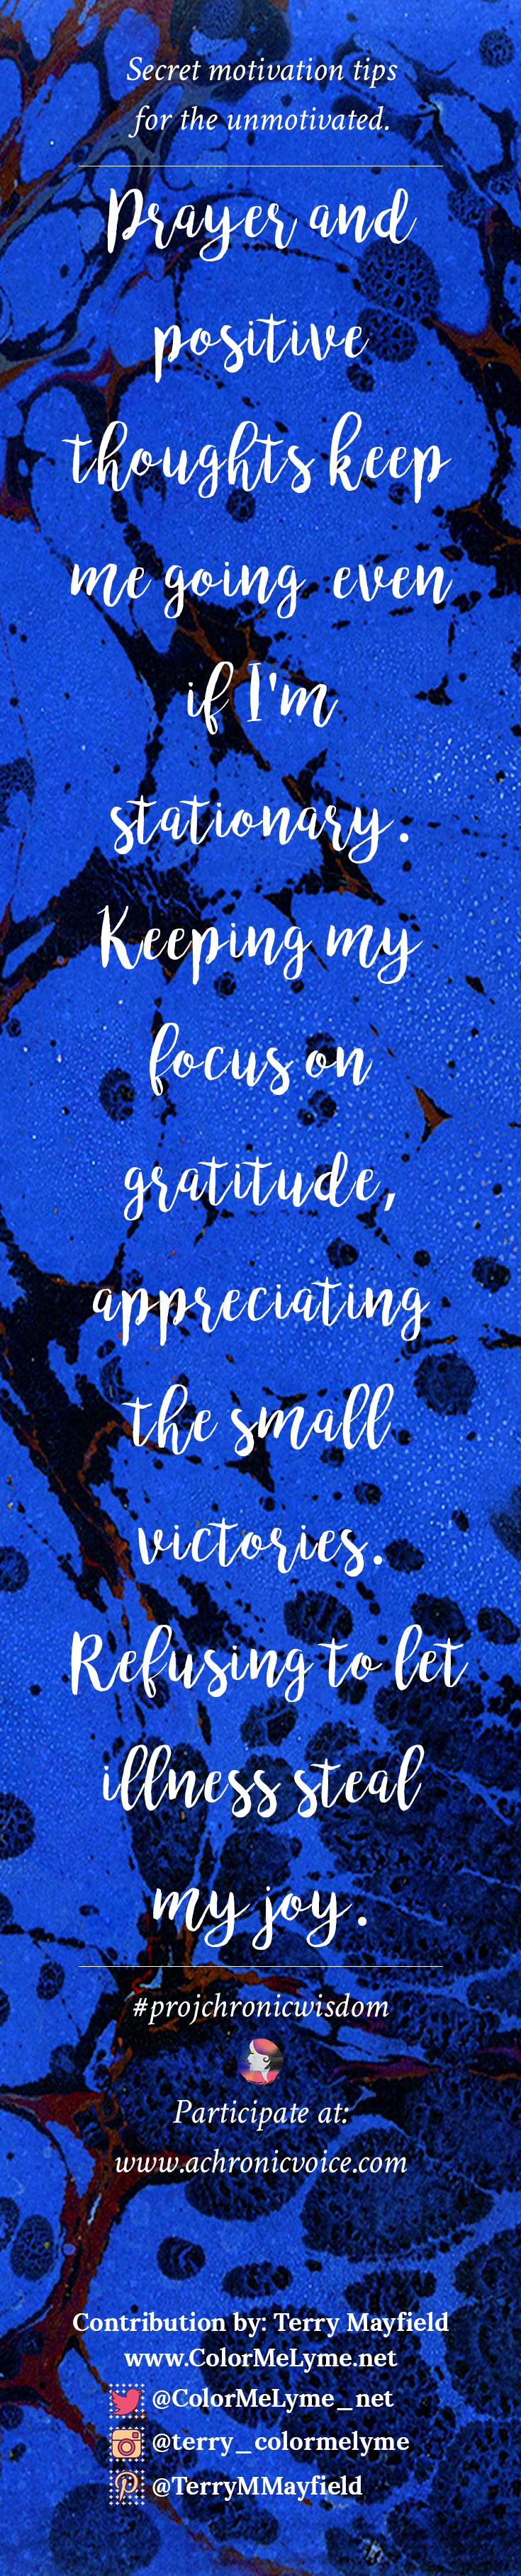 "Prayer and positive thoughts keep me going, even if I'm stationary. Keeping my focus on gratitude; appreciating the small victories. Refusing to let illness steal my joy." - Terry Mayfield | Participate here: www.achronicvoice.com